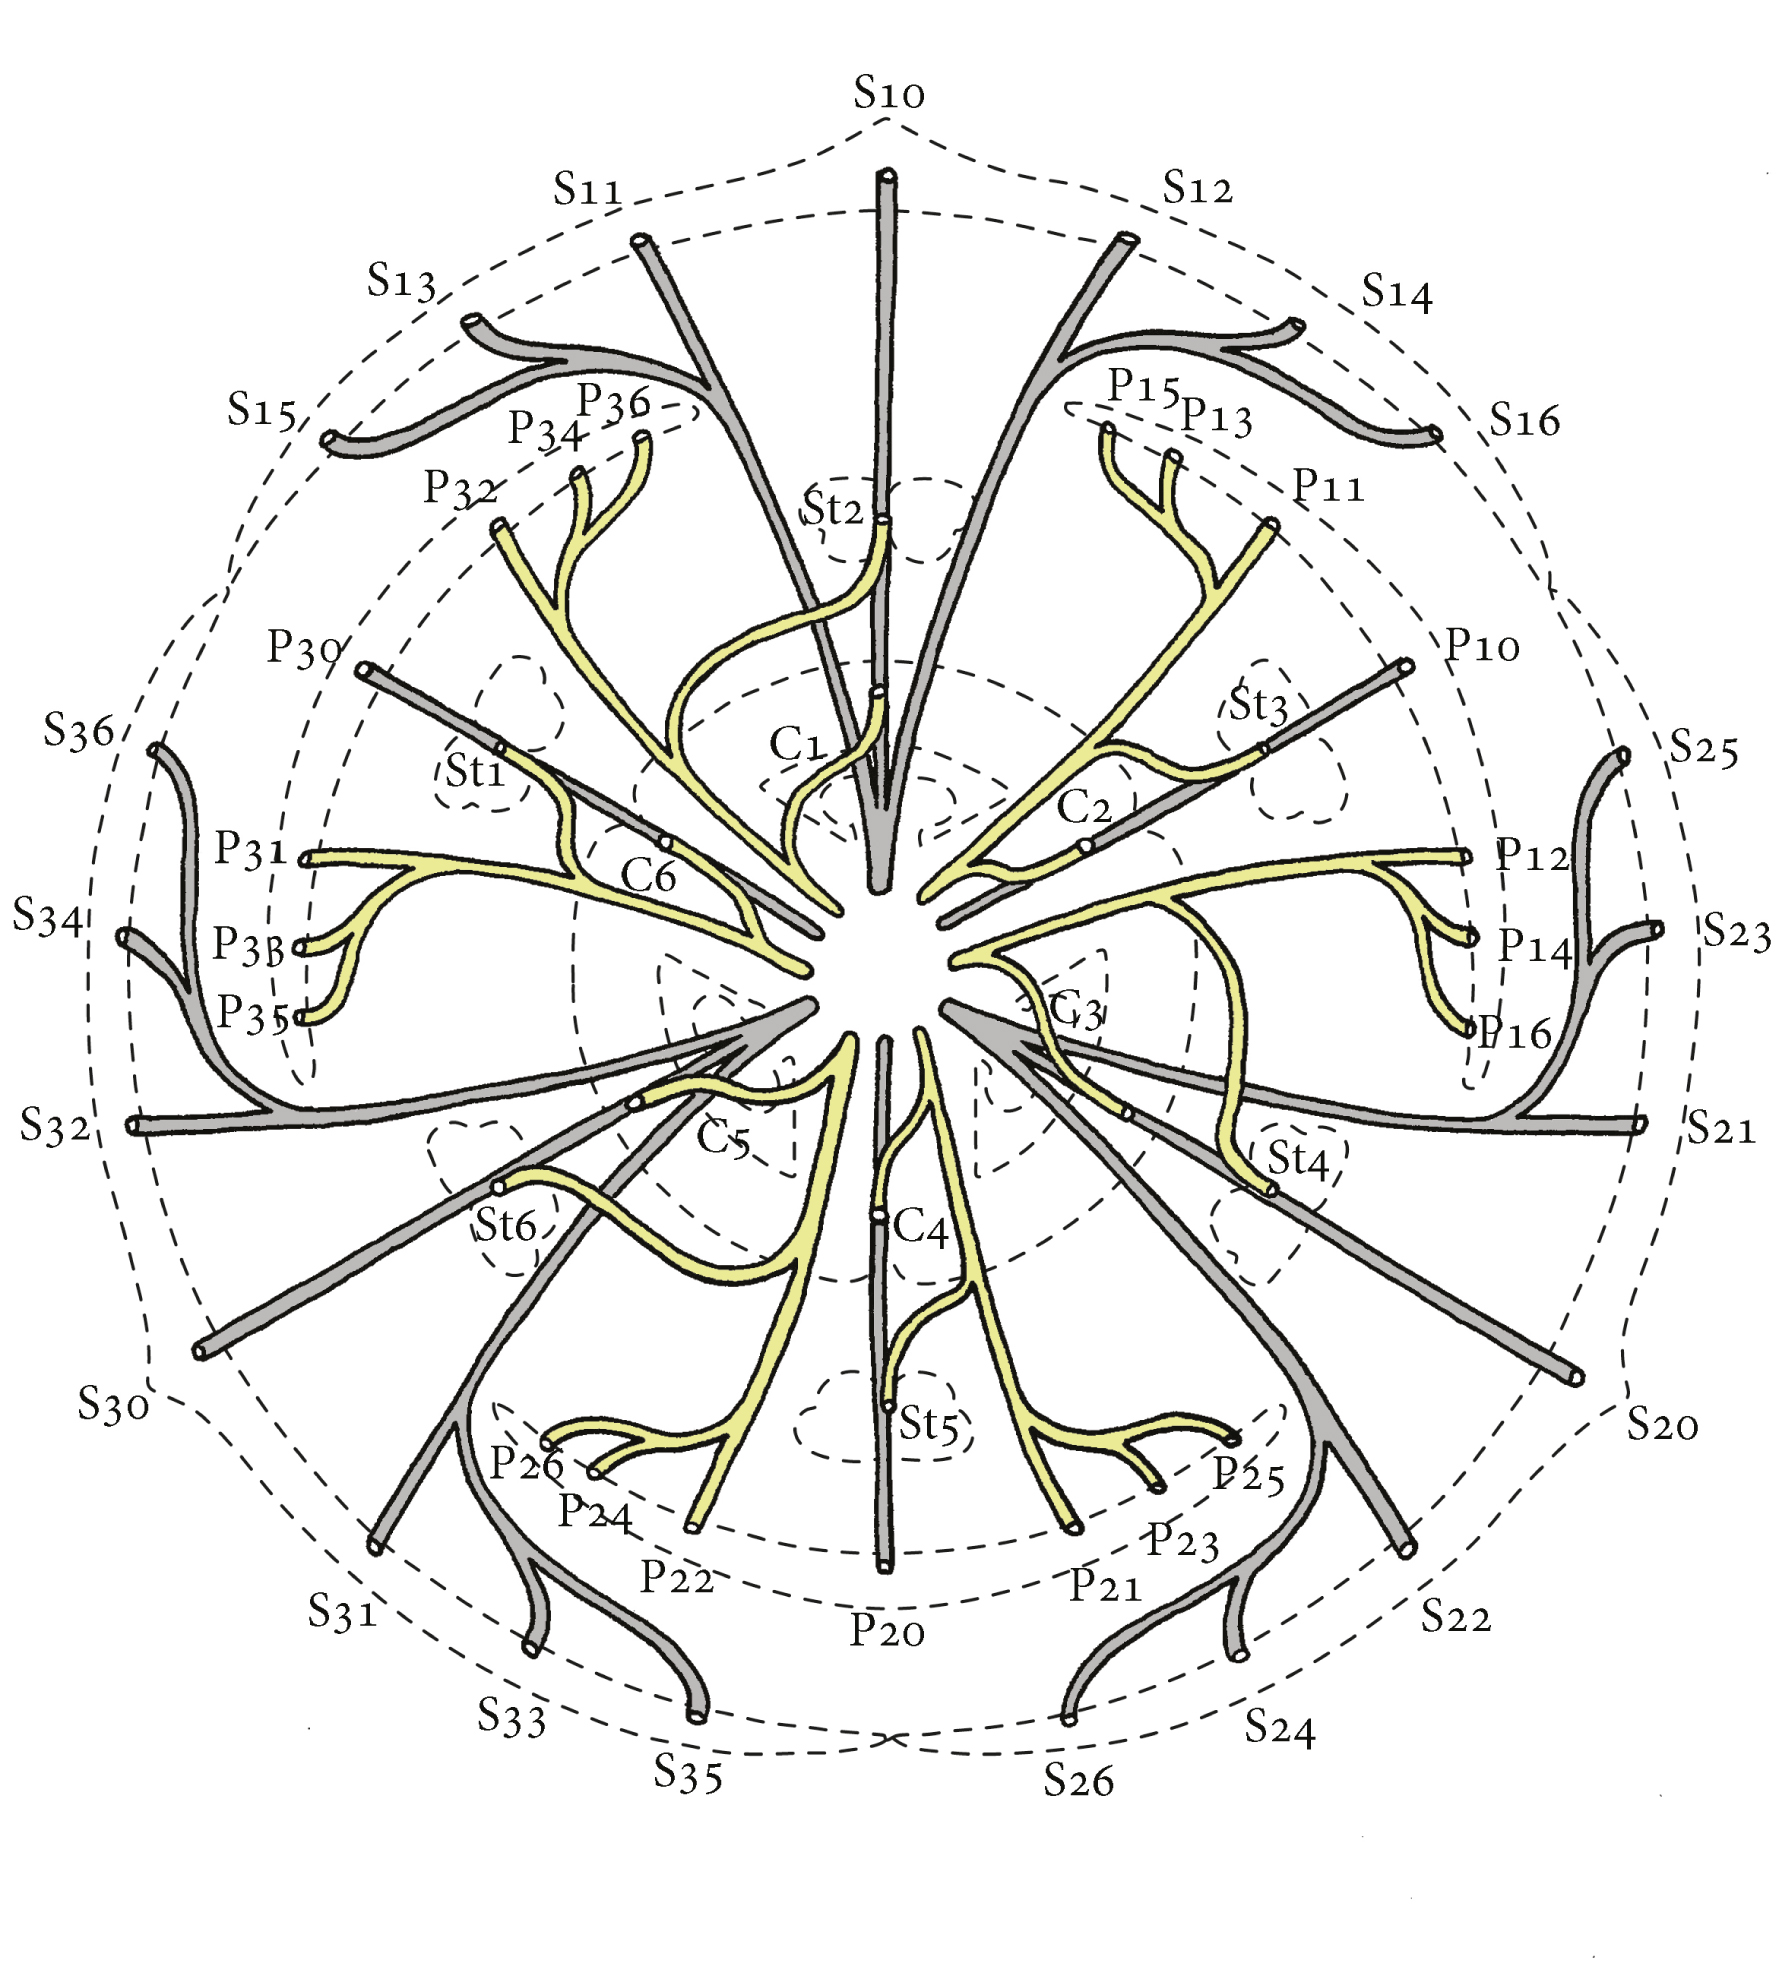 Fig. 4. The diagram of the main flower vascularization in Fritillaria montana Hoppe. See abbreviations in text.